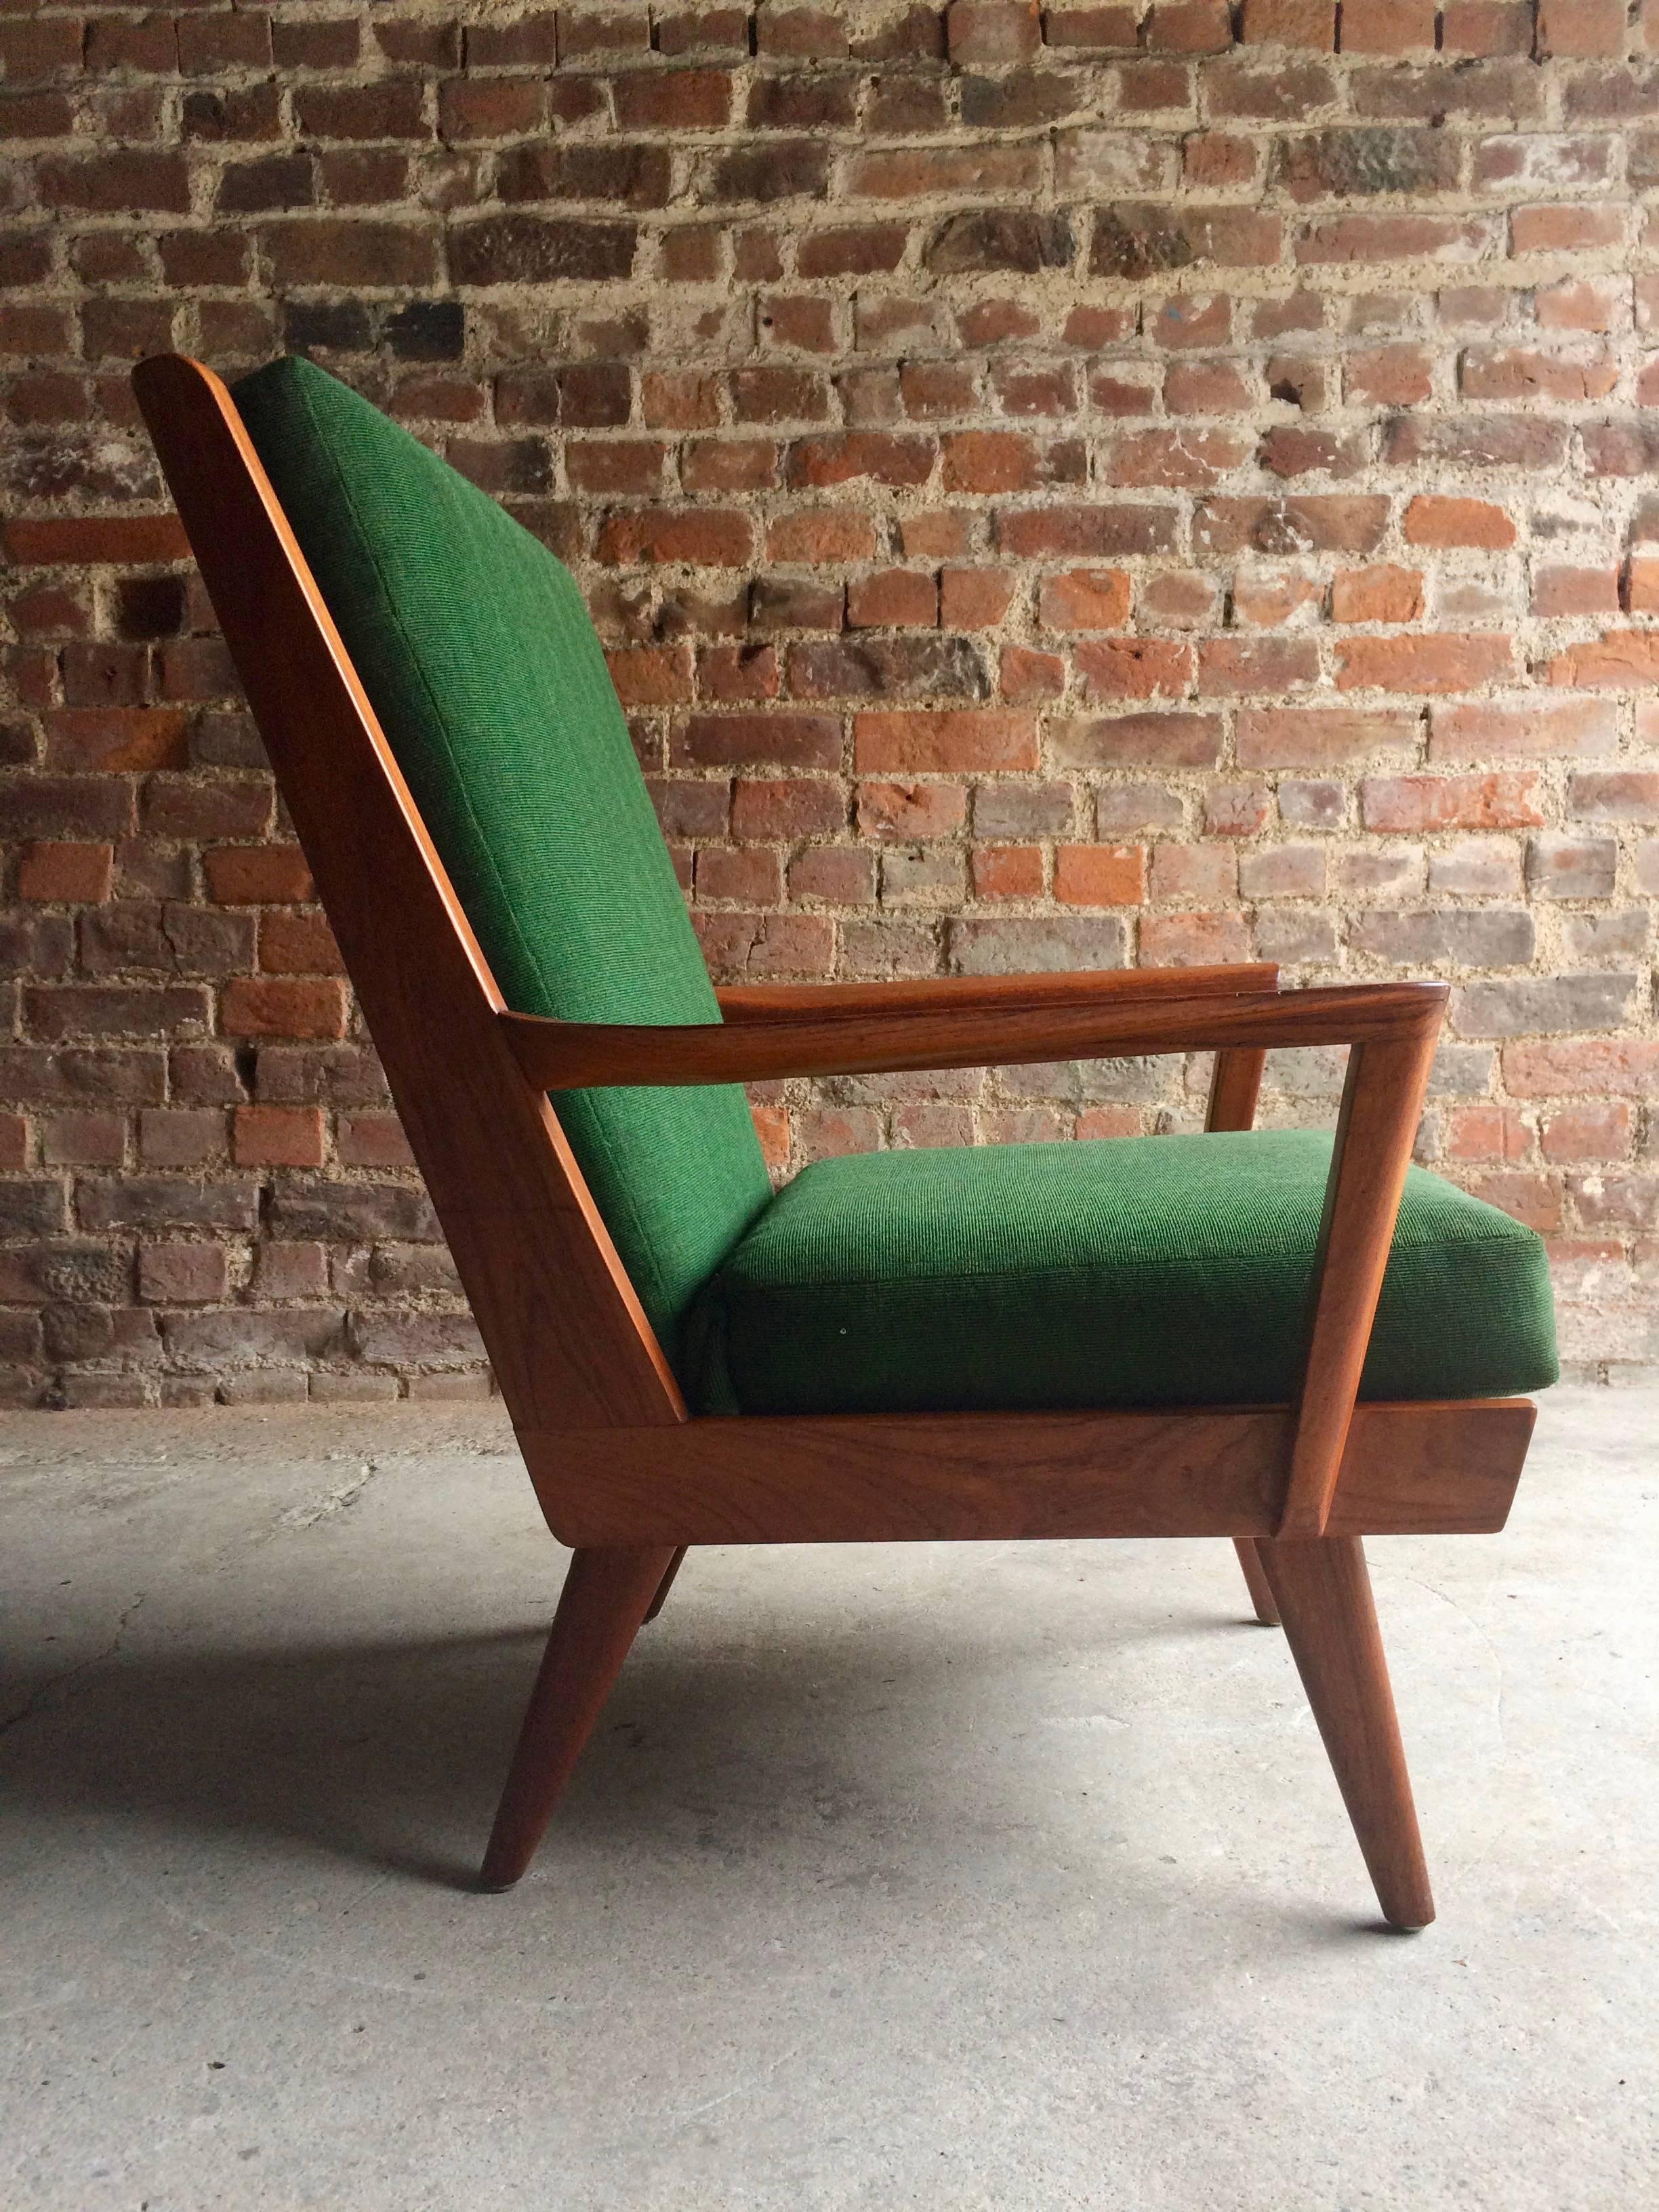 A beautiful midcentury Danish teak armchair circa 1950s, good clean lines with a low teak frame with removable original green cushions with sprung base, the chair is in good original condition with only light wear and extremely